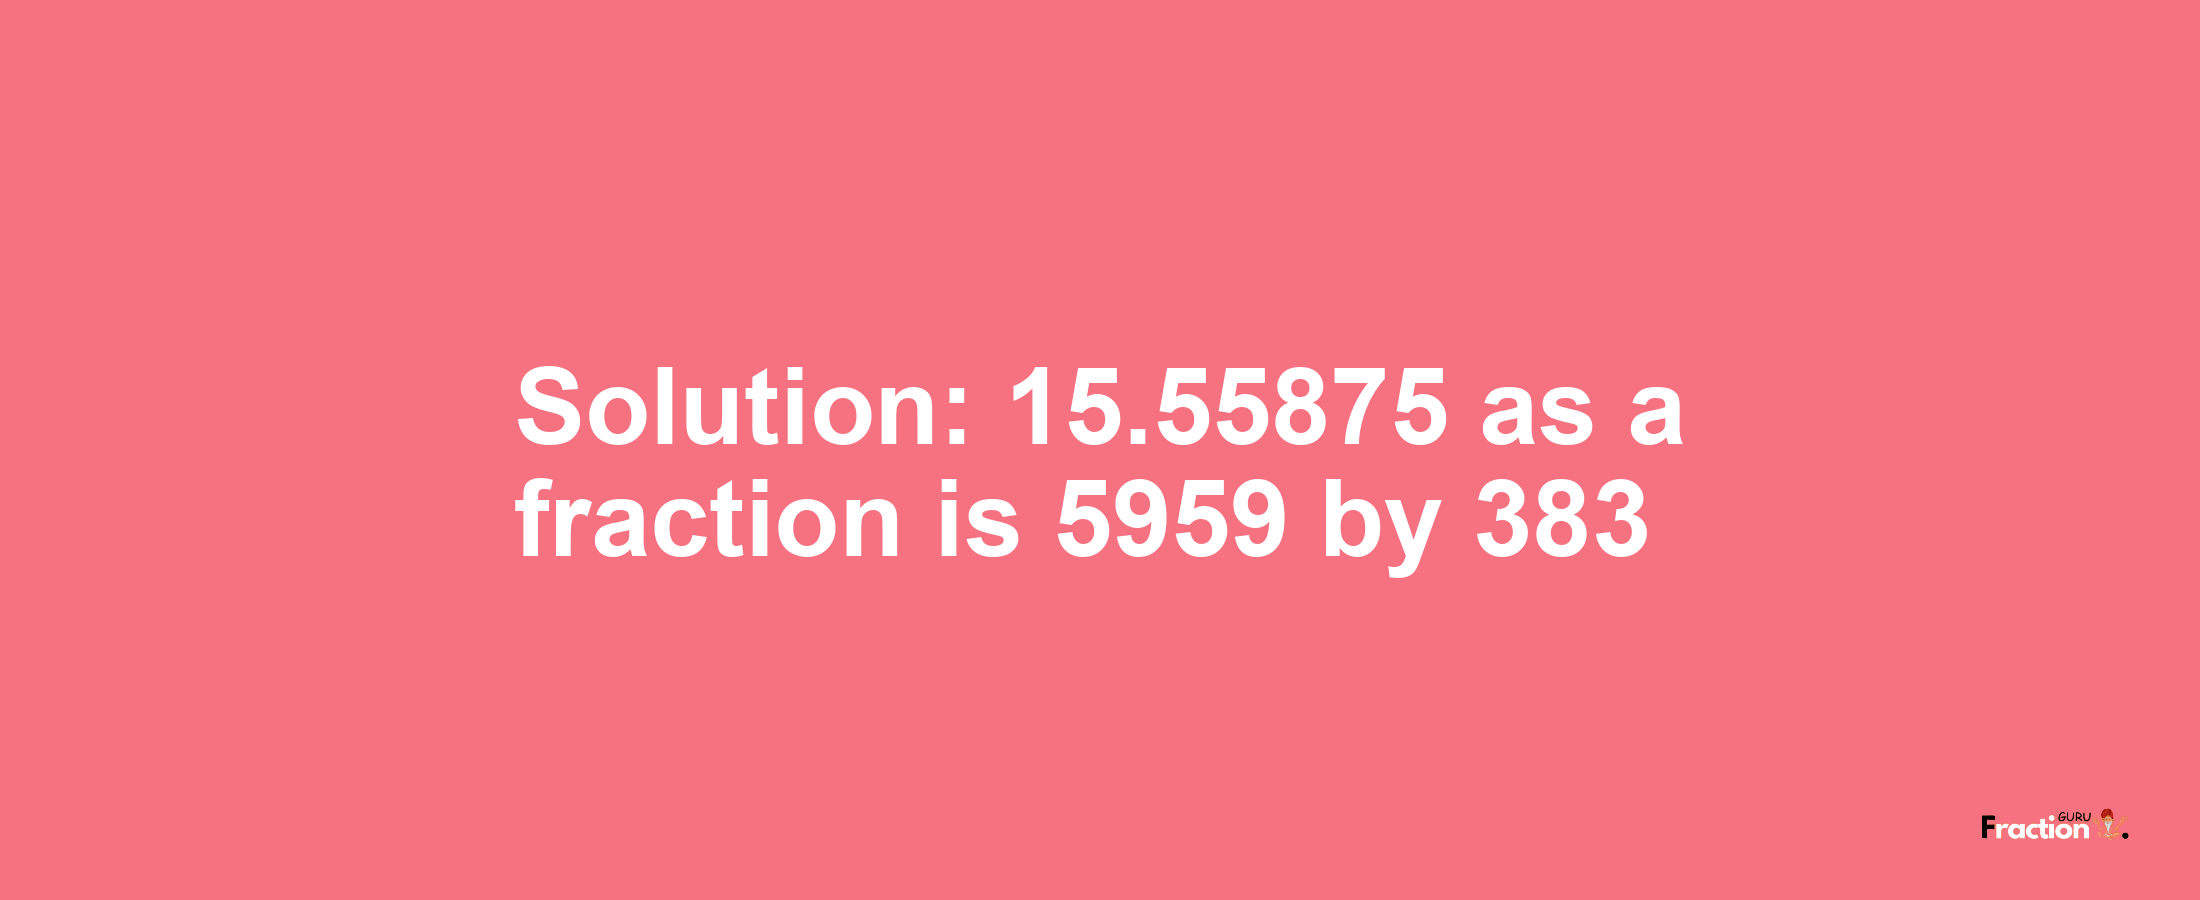 Solution:15.55875 as a fraction is 5959/383